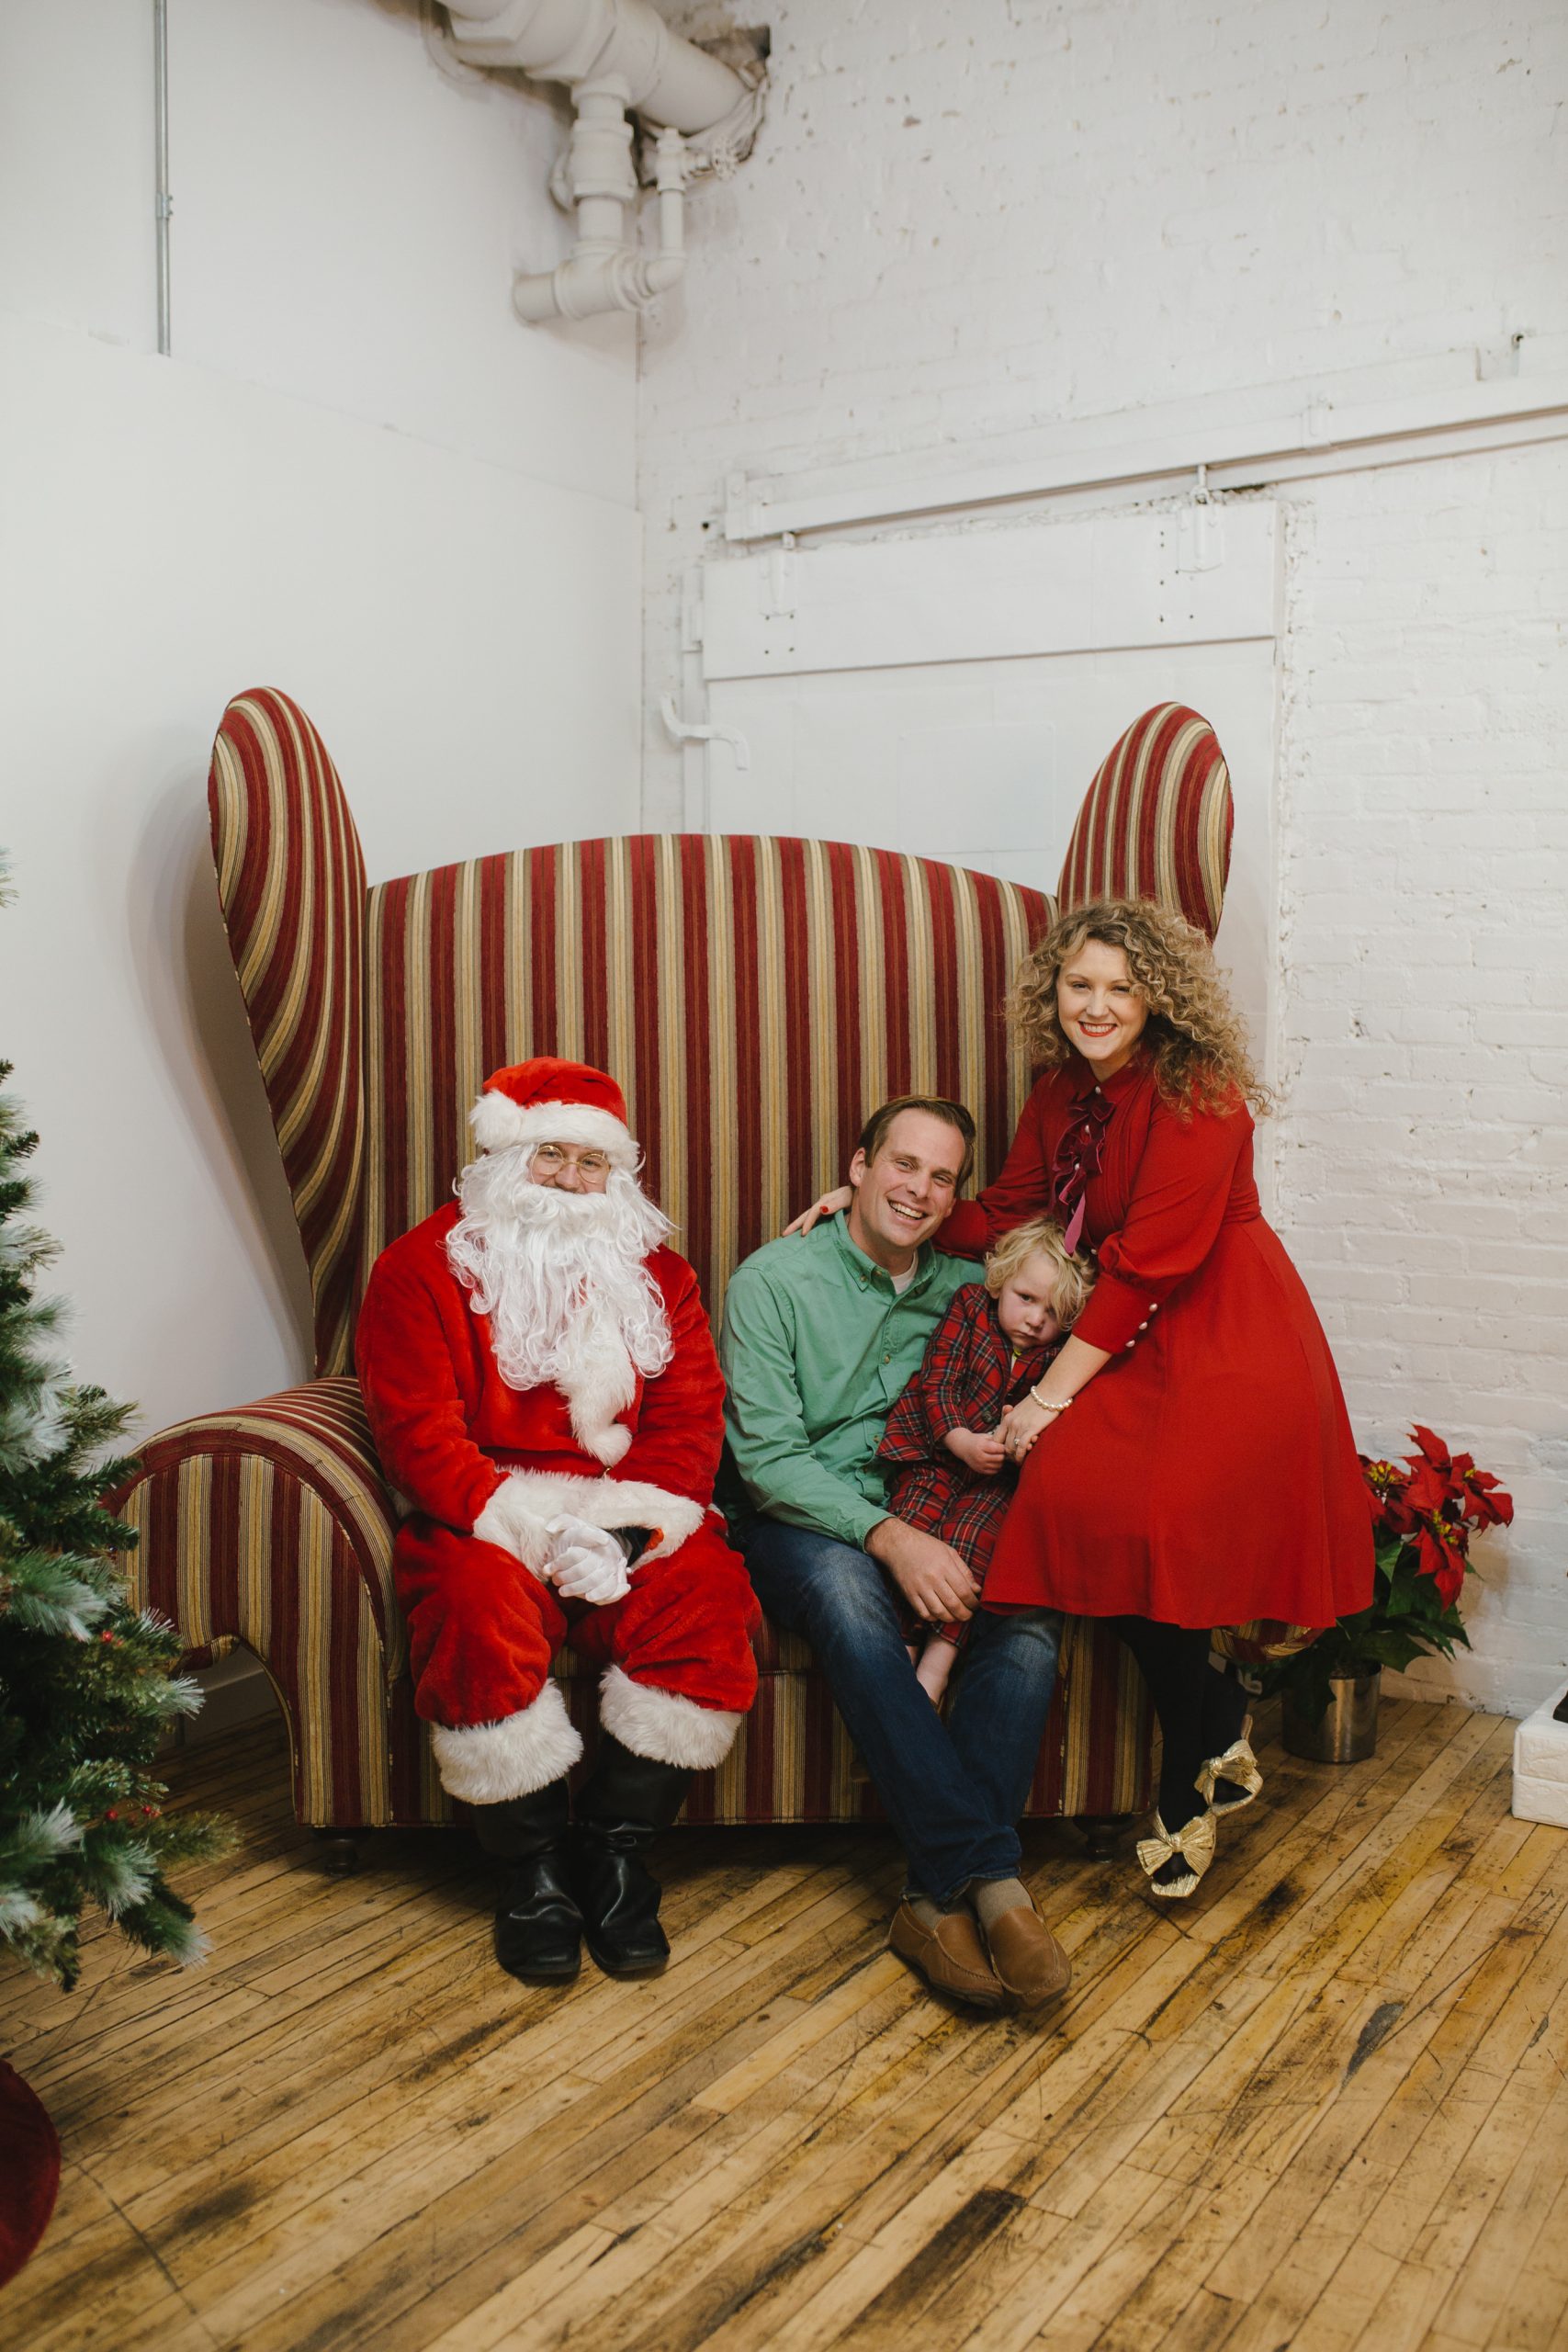 Photos with Santa went different than expected but we did it!